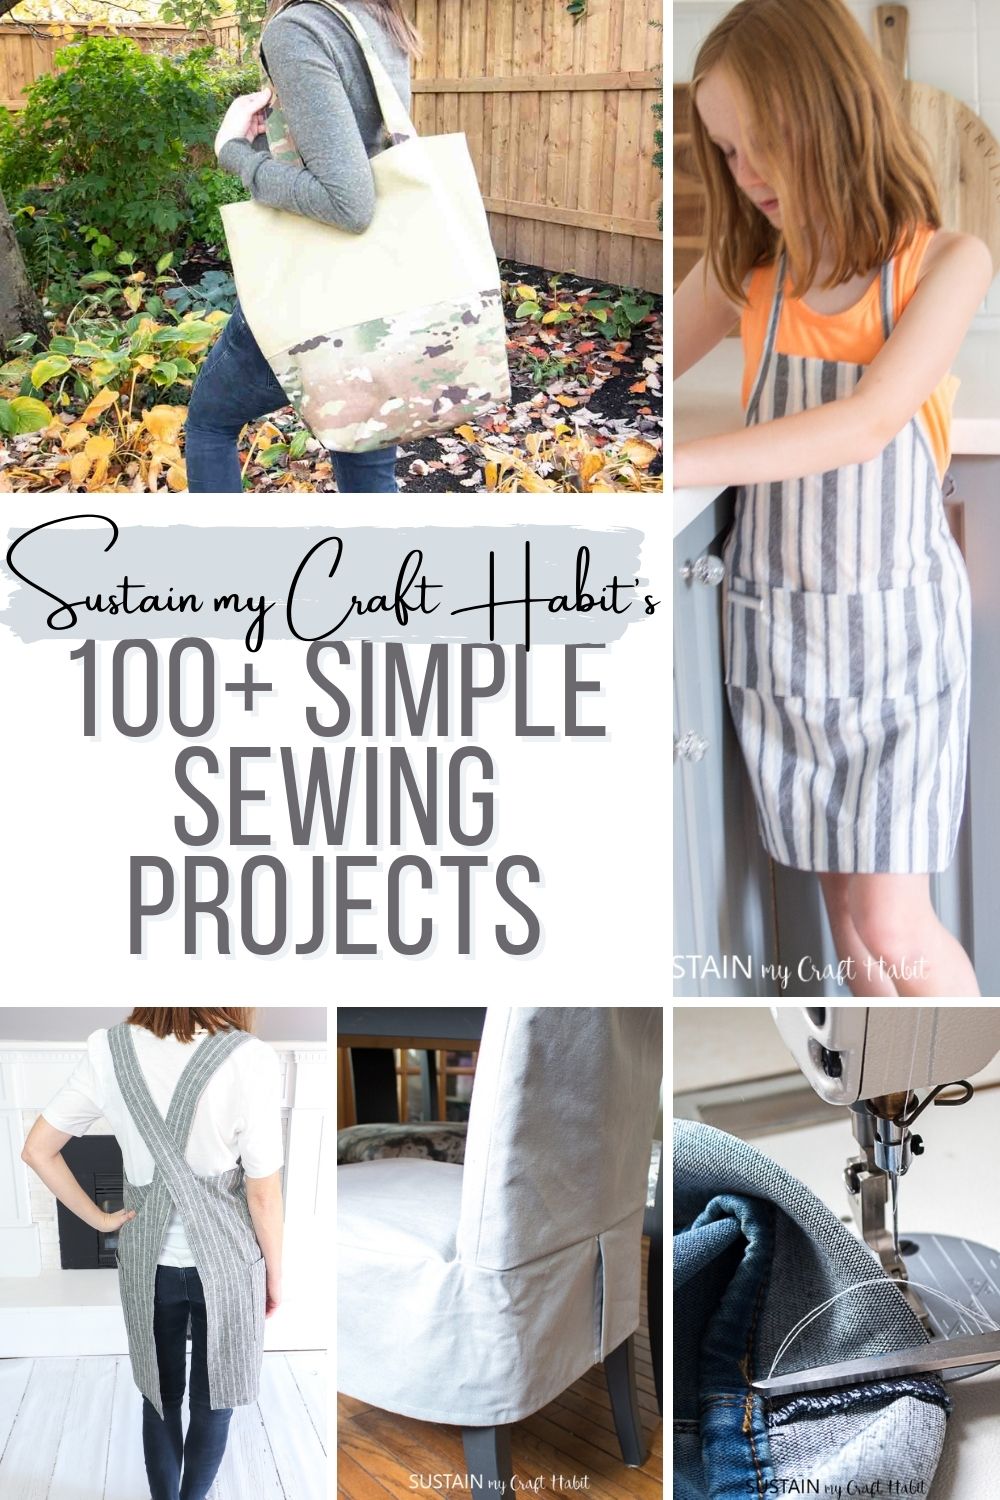 Easy and Fun Beginner Sewing Projects - Easy Peasy Creative Ideas